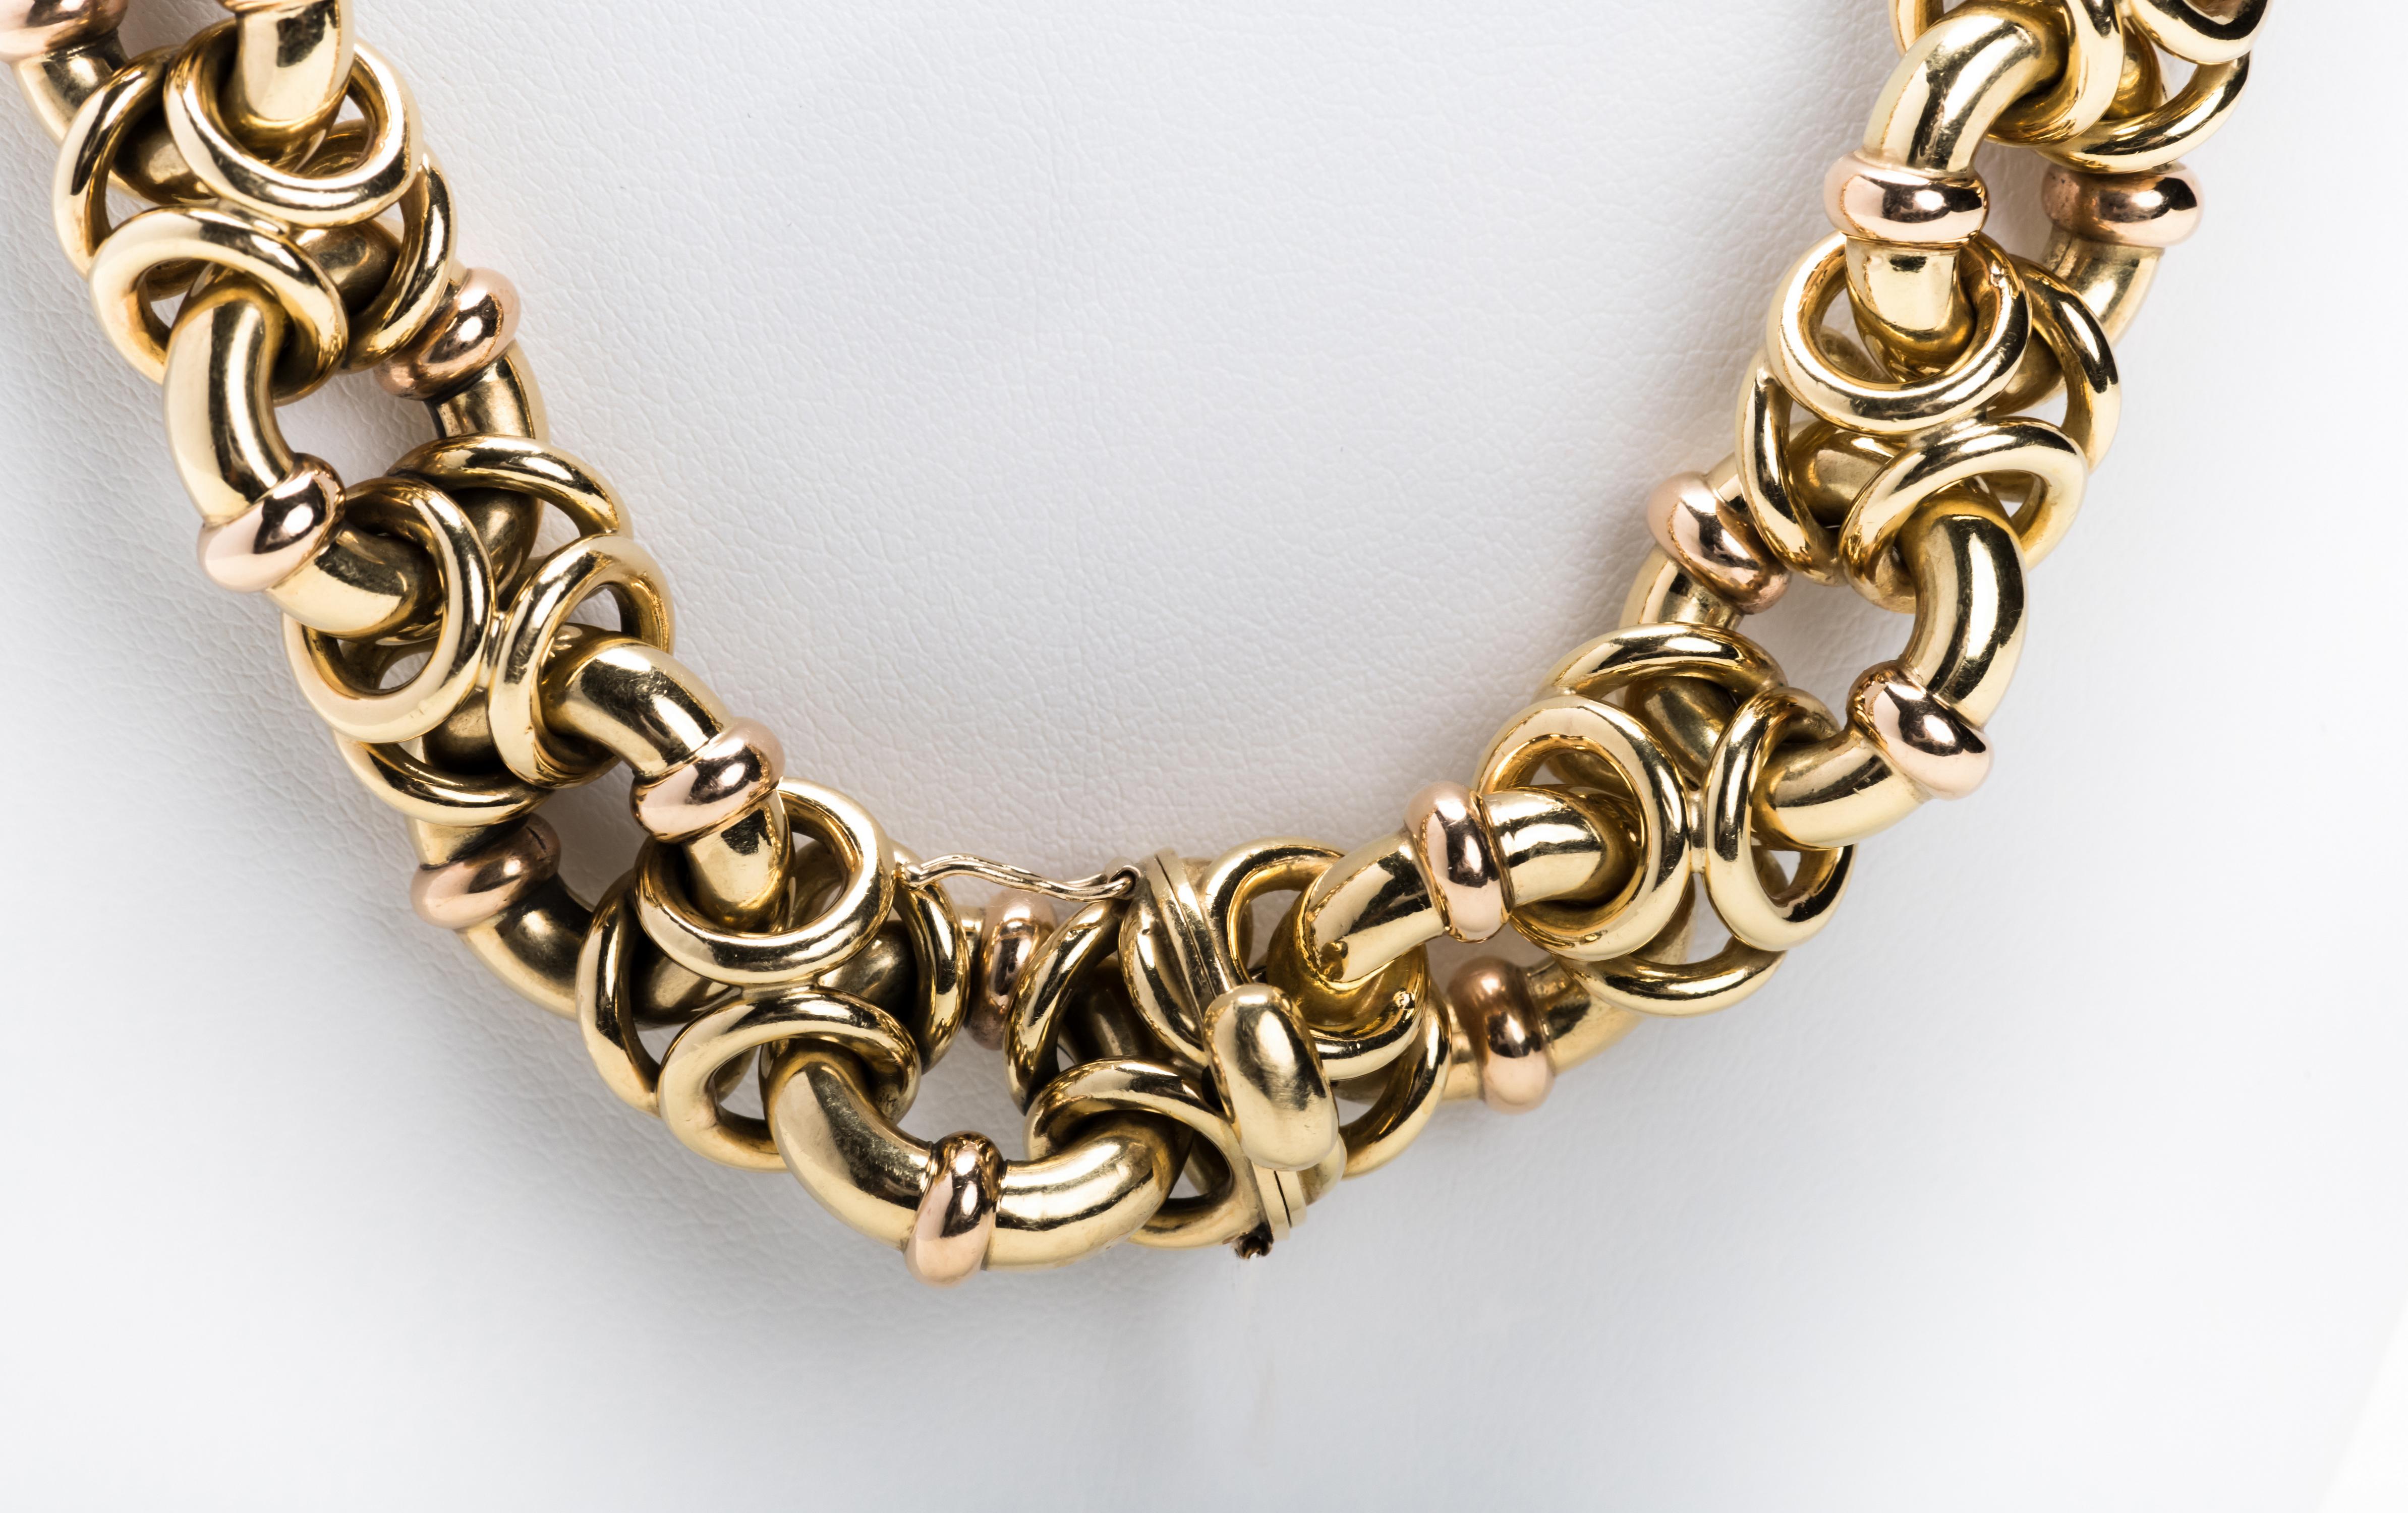 Italian 18 Karat Gold Intertwined Link Necklace with Detachable Bracelet In Excellent Condition For Sale In West Hollywood, CA